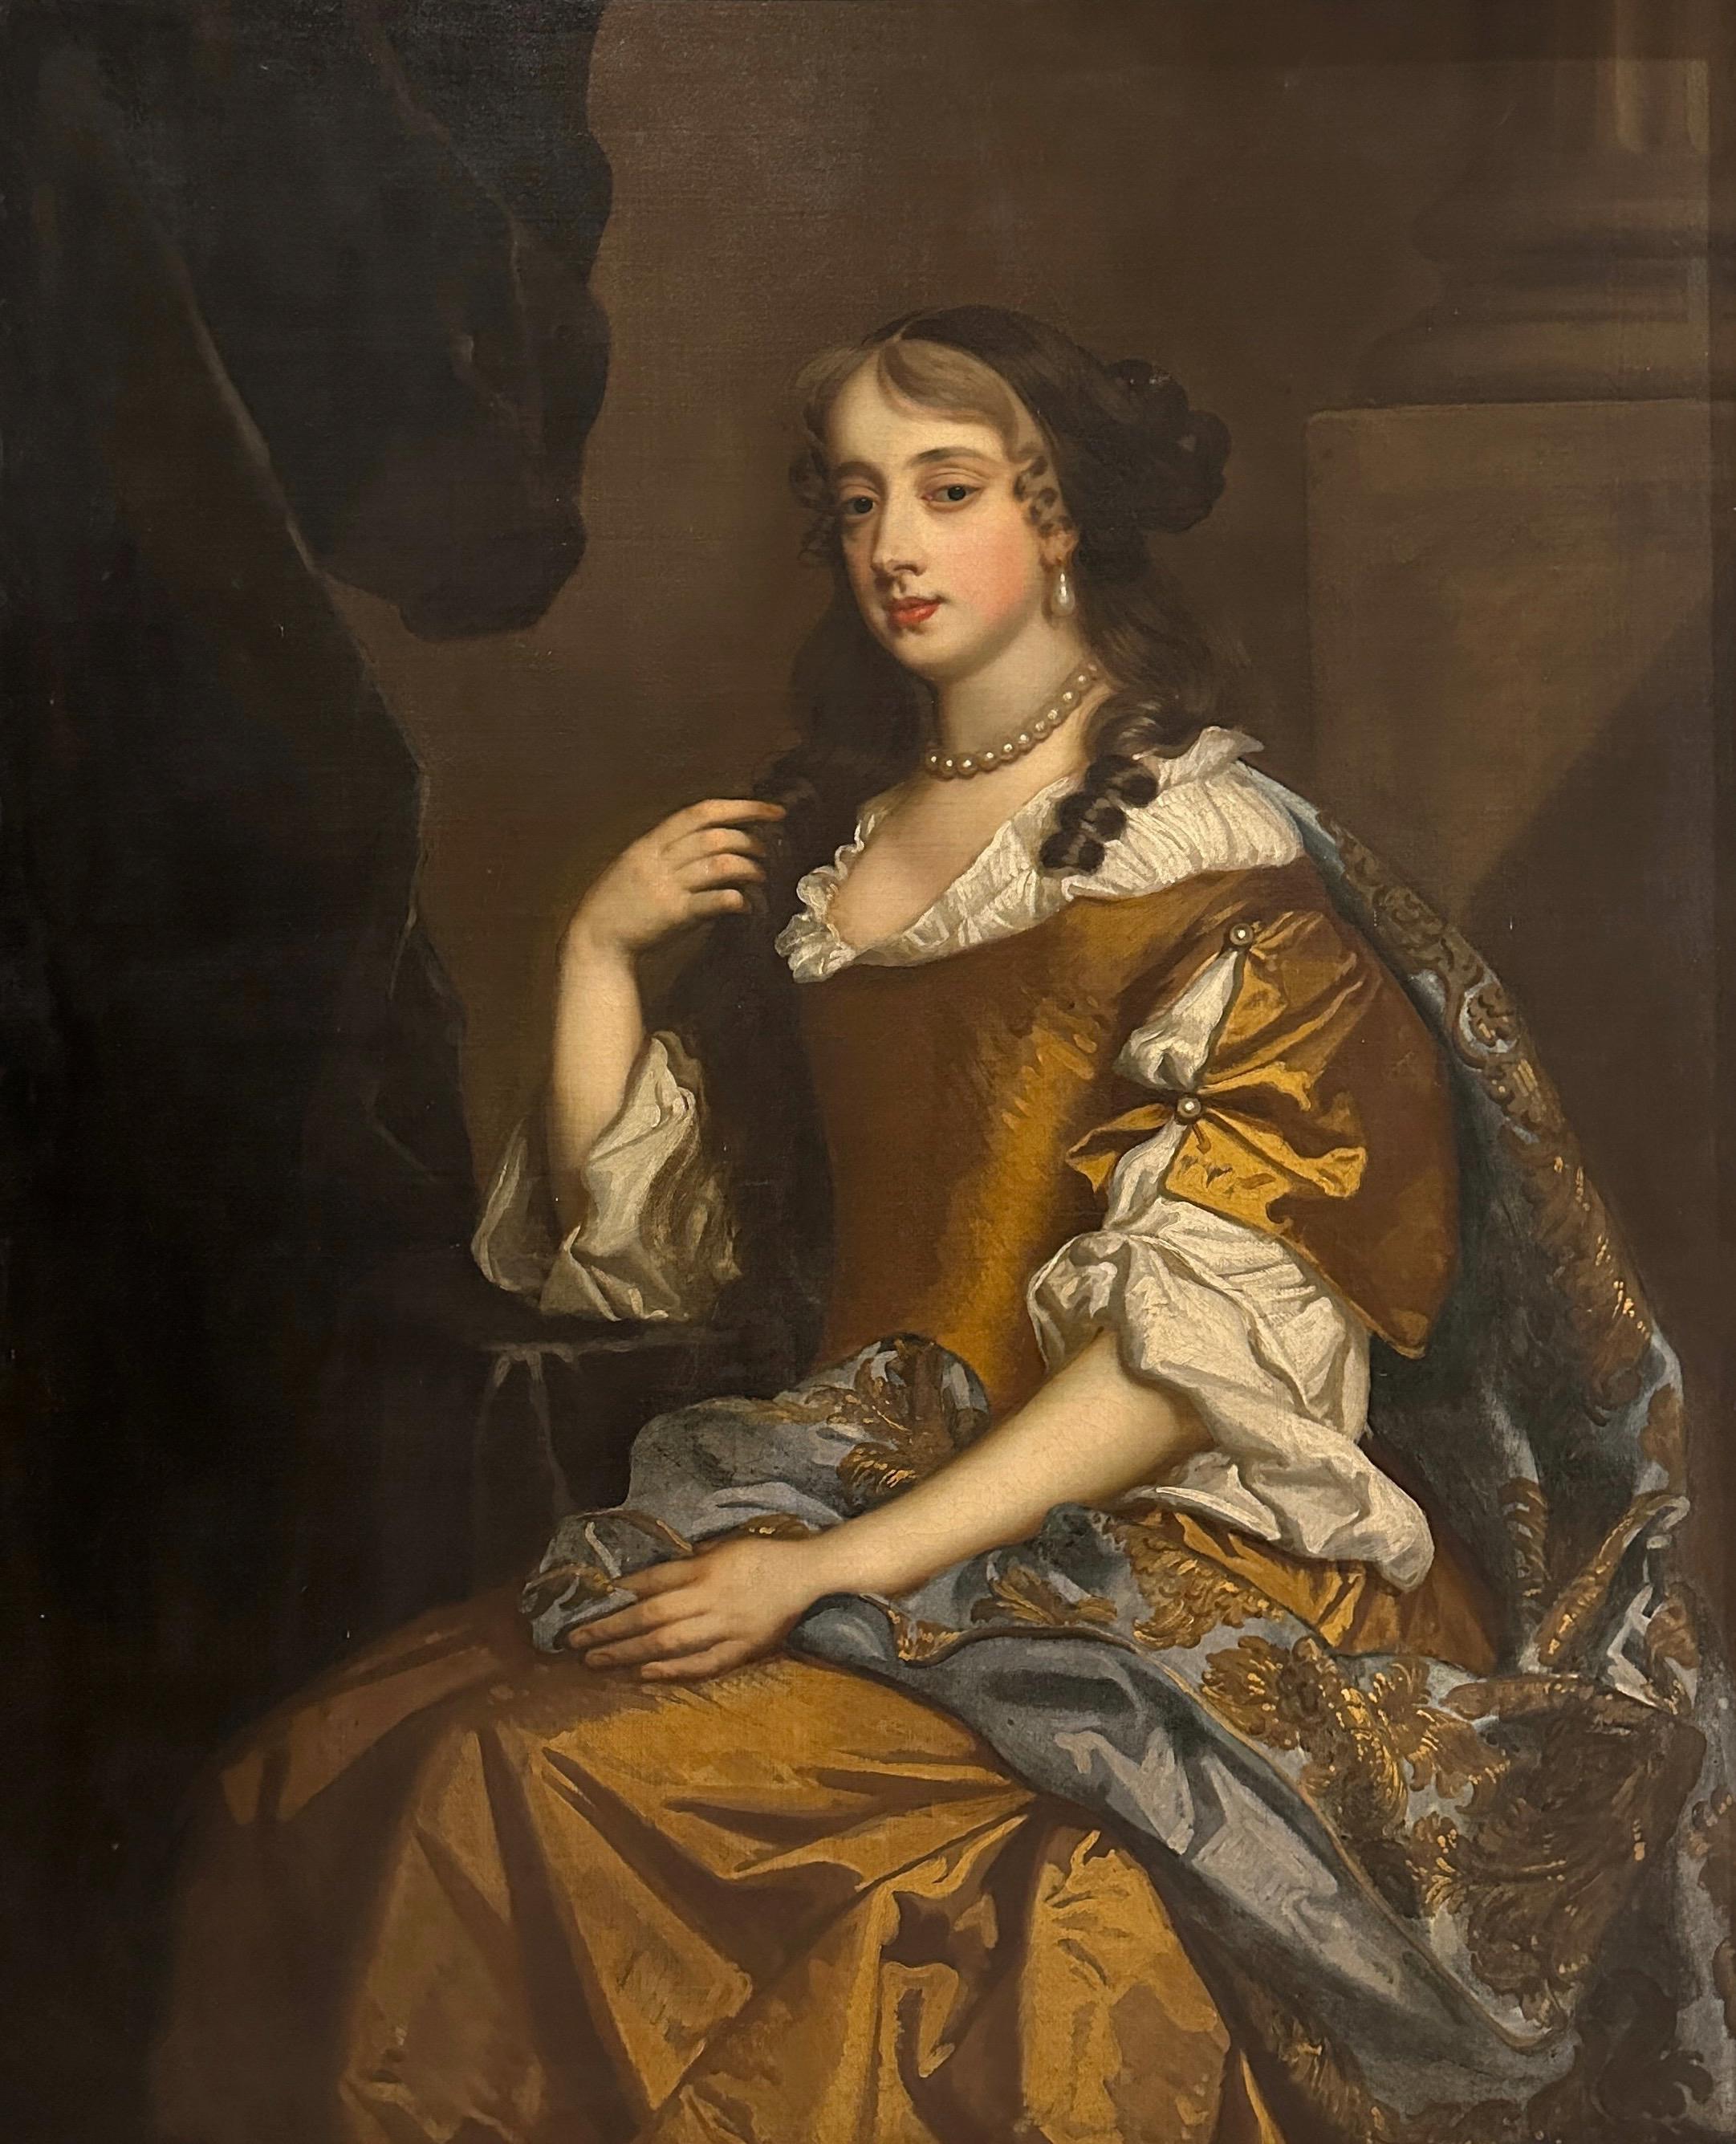 17th century portrait of a lady seated in an interior - Painting by Studio of Peter Lely